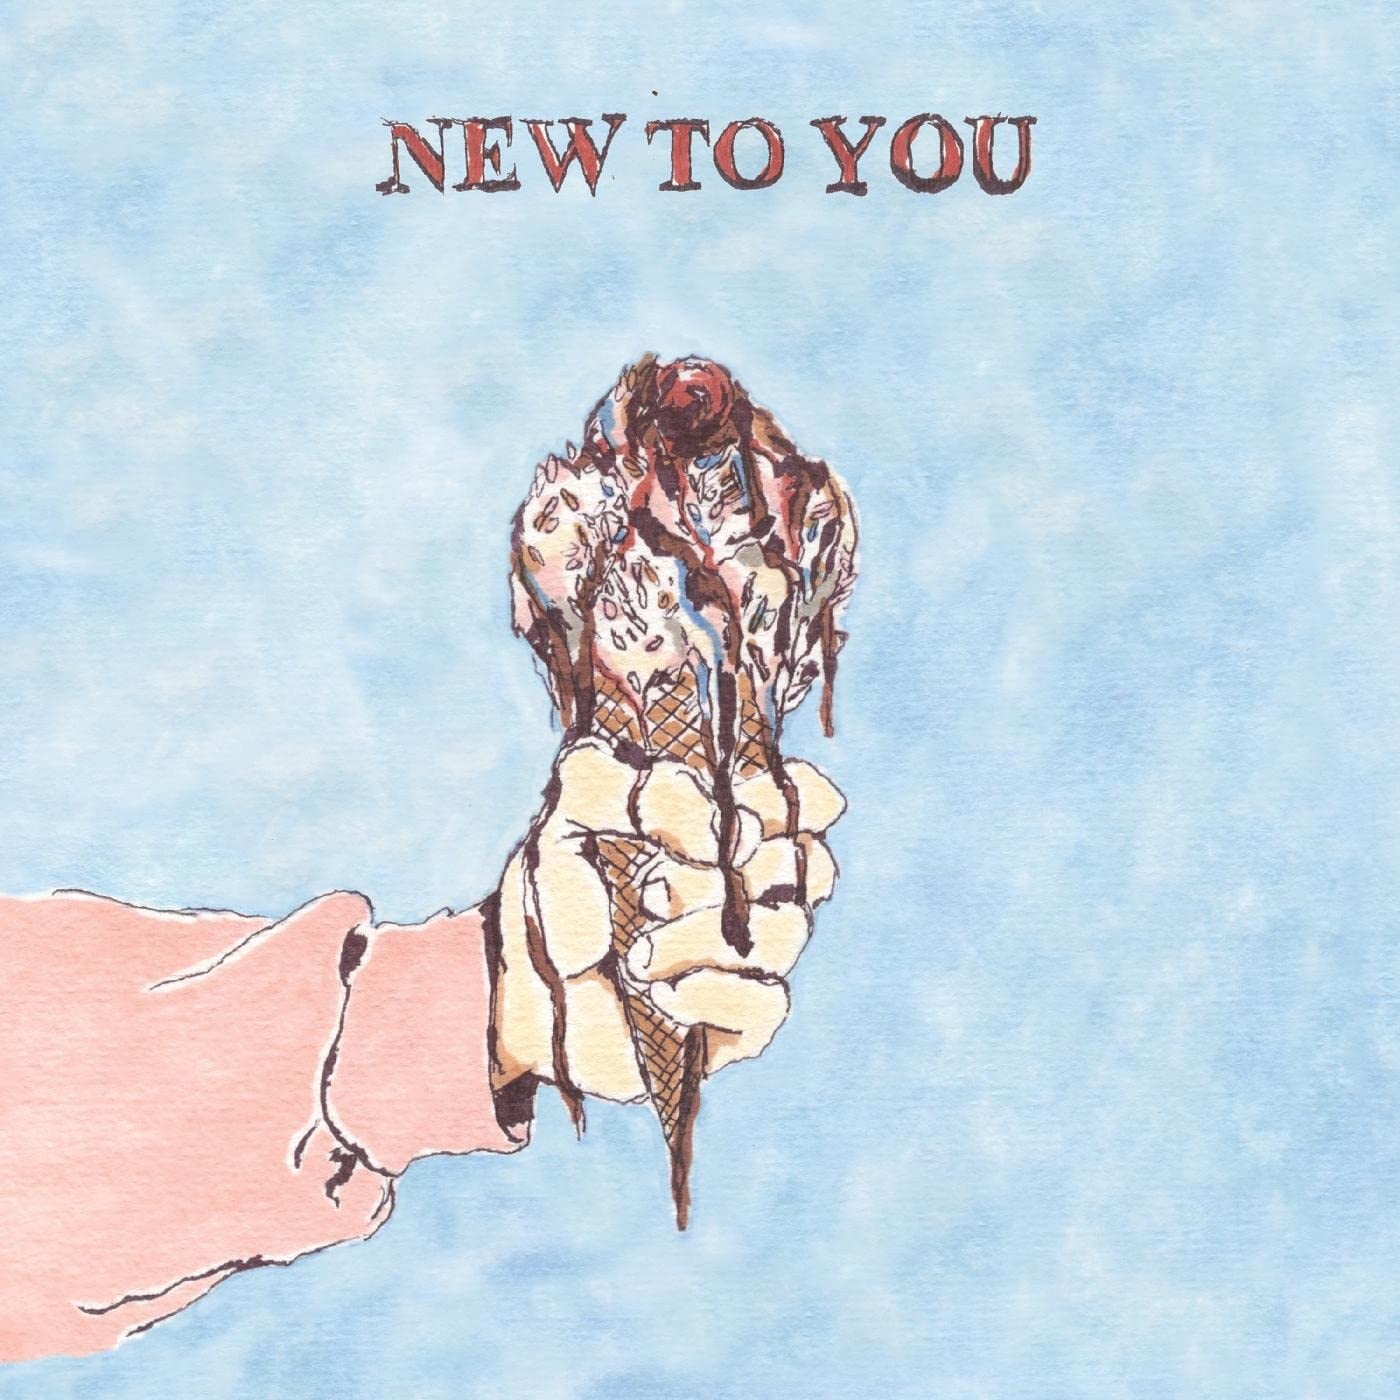 Bread Pilot - New To You vinyl cover